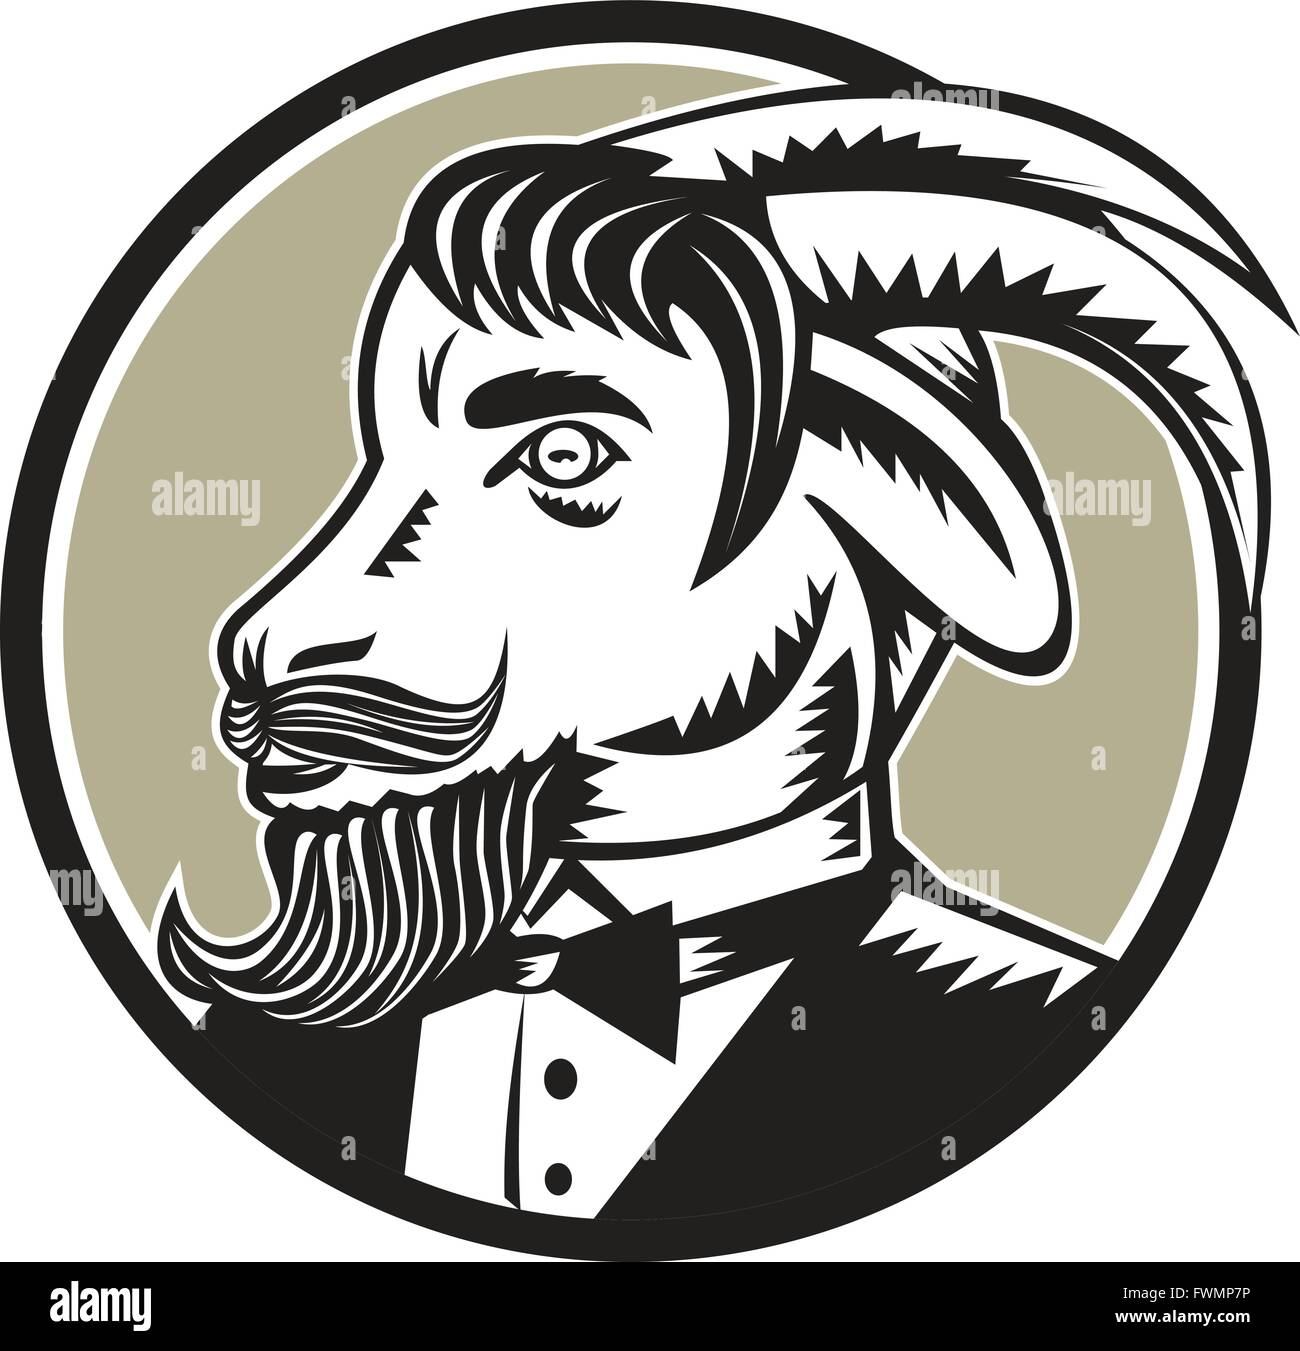 Illustration of a goat ram with big horns and moustache beard wearing tuxedo suit looking to the side set inside circle done in Stock Vector